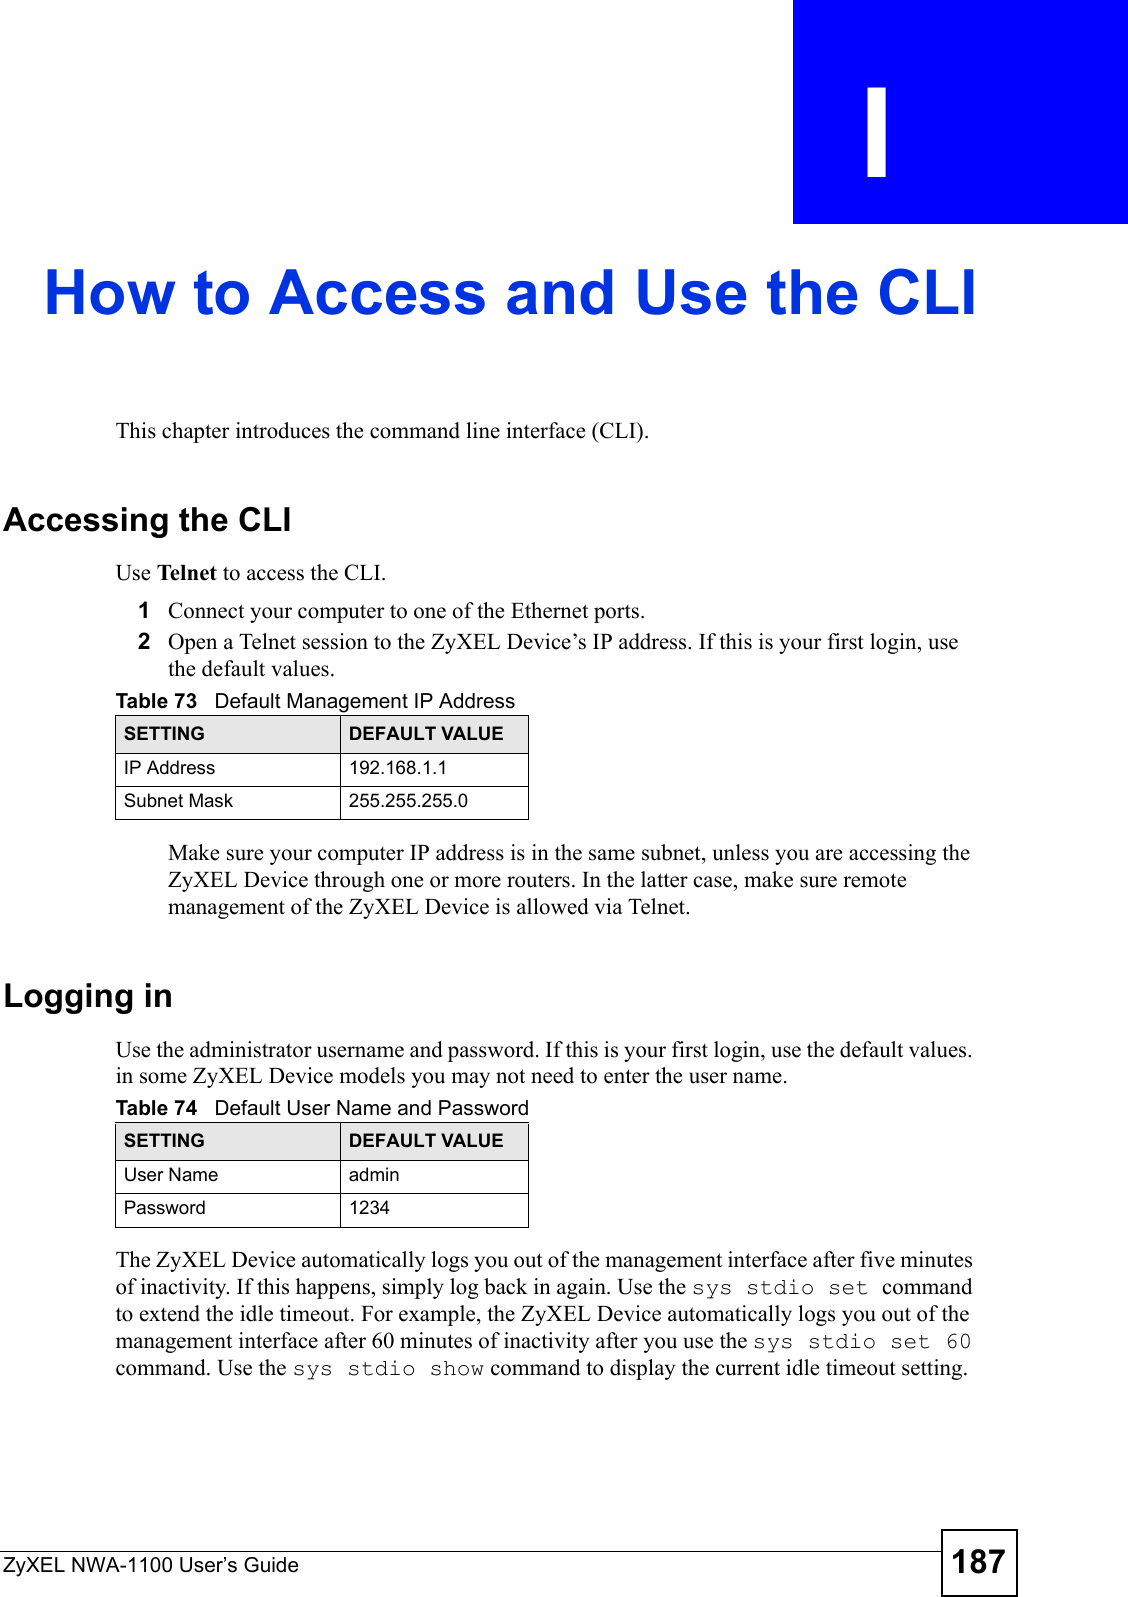 ZyXEL NWA-1100 User’s Guide 187APPENDIX  I How to Access and Use the CLIThis chapter introduces the command line interface (CLI).Accessing the CLIUse Telnet to access the CLI.1Connect your computer to one of the Ethernet ports.2Open a Telnet session to the ZyXEL Device’s IP address. If this is your first login, use the default values.Make sure your computer IP address is in the same subnet, unless you are accessing the ZyXEL Device through one or more routers. In the latter case, make sure remote management of the ZyXEL Device is allowed via Telnet.Logging inUse the administrator username and password. If this is your first login, use the default values. in some ZyXEL Device models you may not need to enter the user name. The ZyXEL Device automatically logs you out of the management interface after five minutes of inactivity. If this happens, simply log back in again. Use the sys stdio set command to extend the idle timeout. For example, the ZyXEL Device automatically logs you out of the management interface after 60 minutes of inactivity after you use the sys stdio set 60 command. Use the sys stdio show command to display the current idle timeout setting.Table 73   Default Management IP AddressSETTING DEFAULT VALUEIP Address 192.168.1.1Subnet Mask 255.255.255.0Table 74   Default User Name and PasswordSETTING DEFAULT VALUEUser Name adminPassword 1234